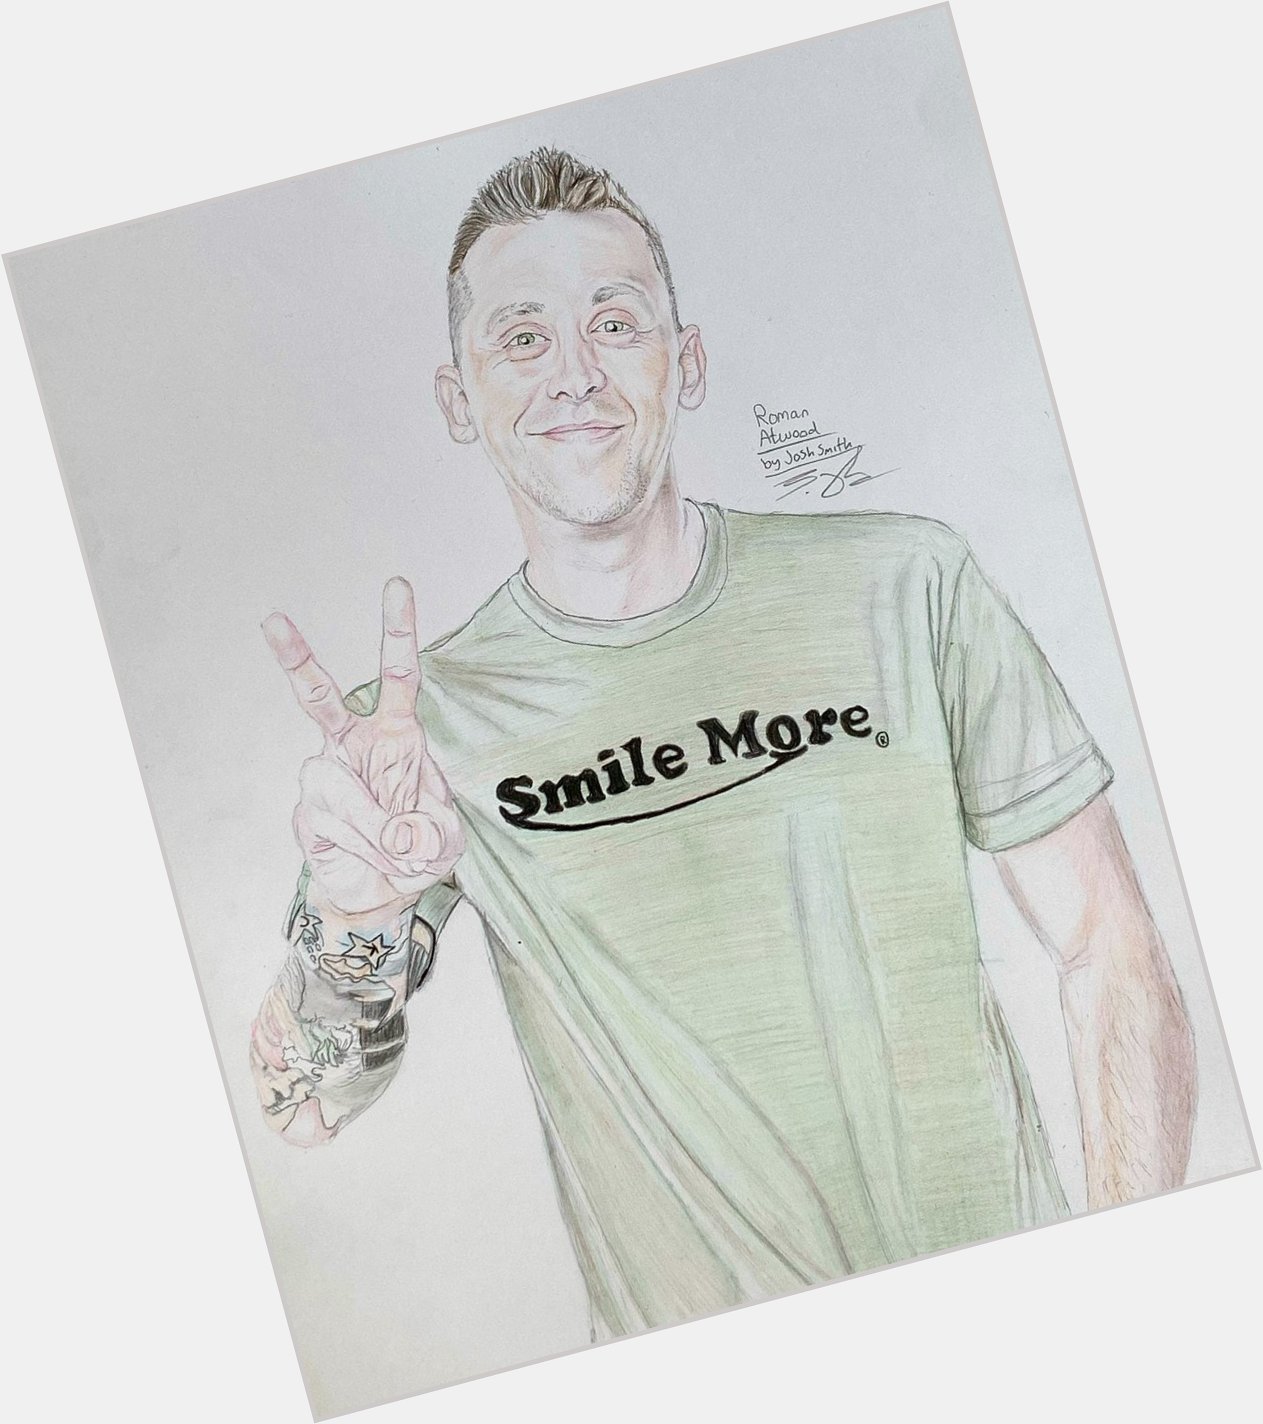 Huge Happy Birthday to Roman Atwood!! Hope you have a great day Roman, hope you like this new drawing . 